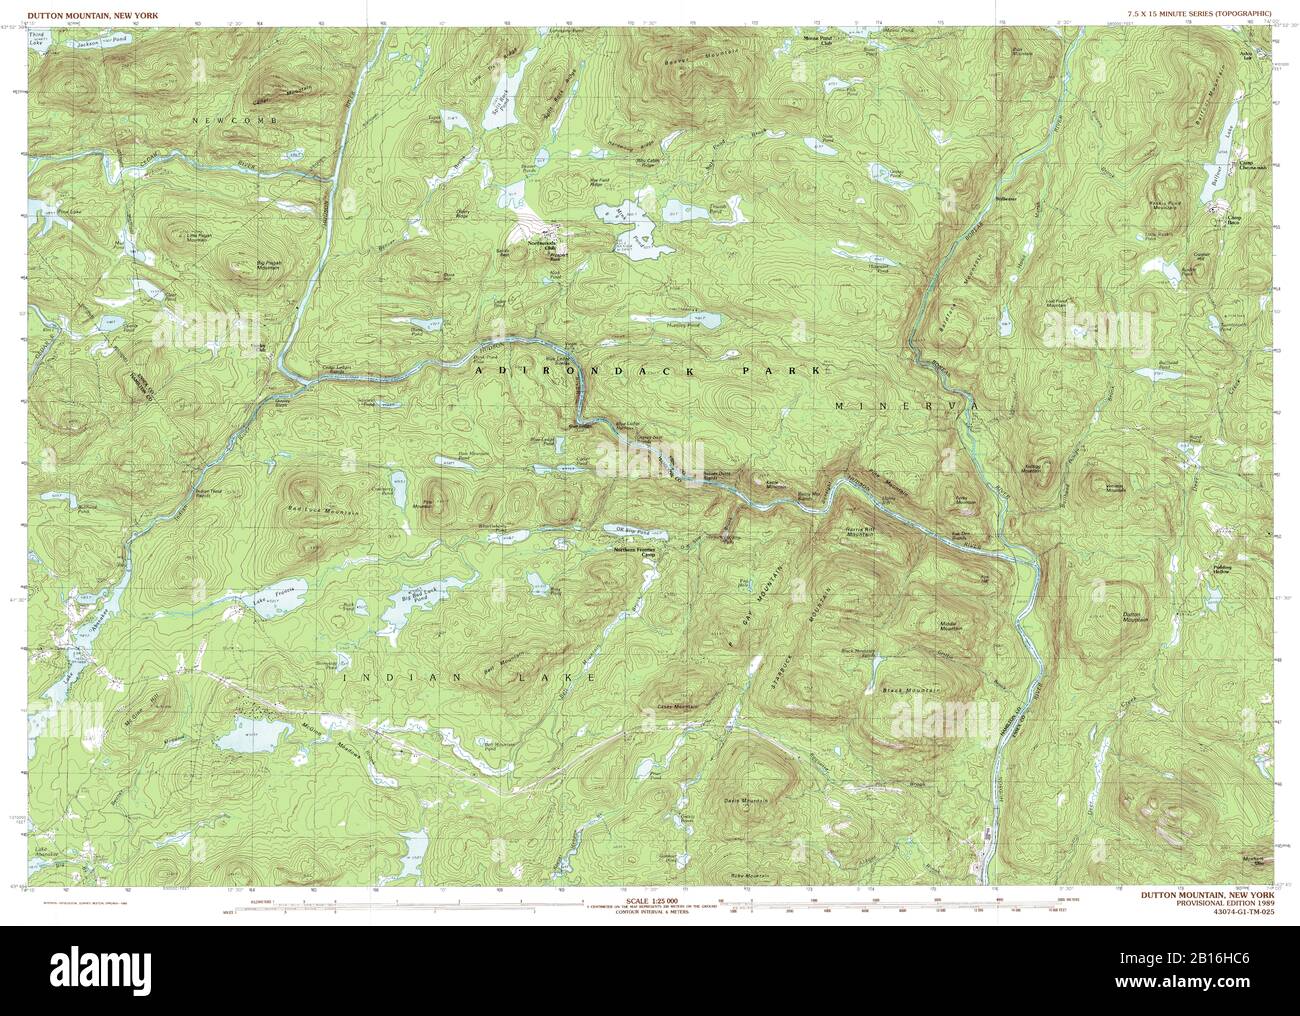 Highly detailed view of the 1989 topographic map for Dutton Mountain, NY Stock Photo